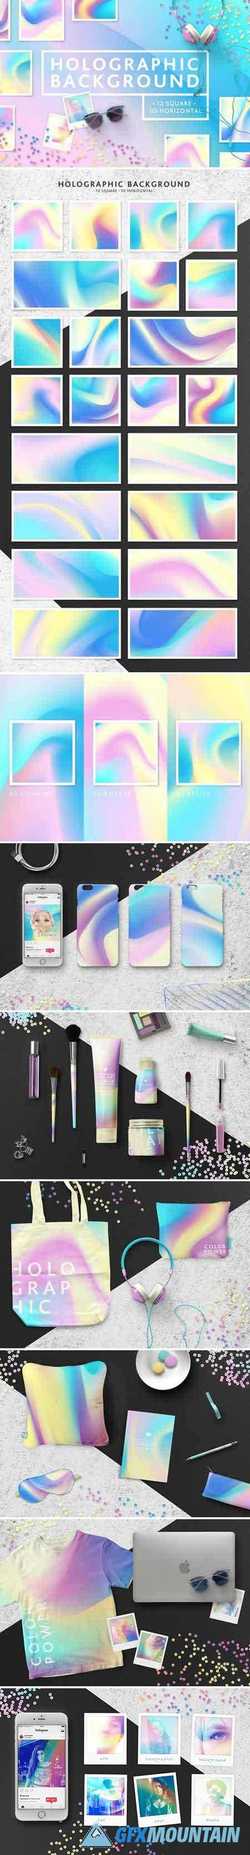 Set Holographic background textures 2397571